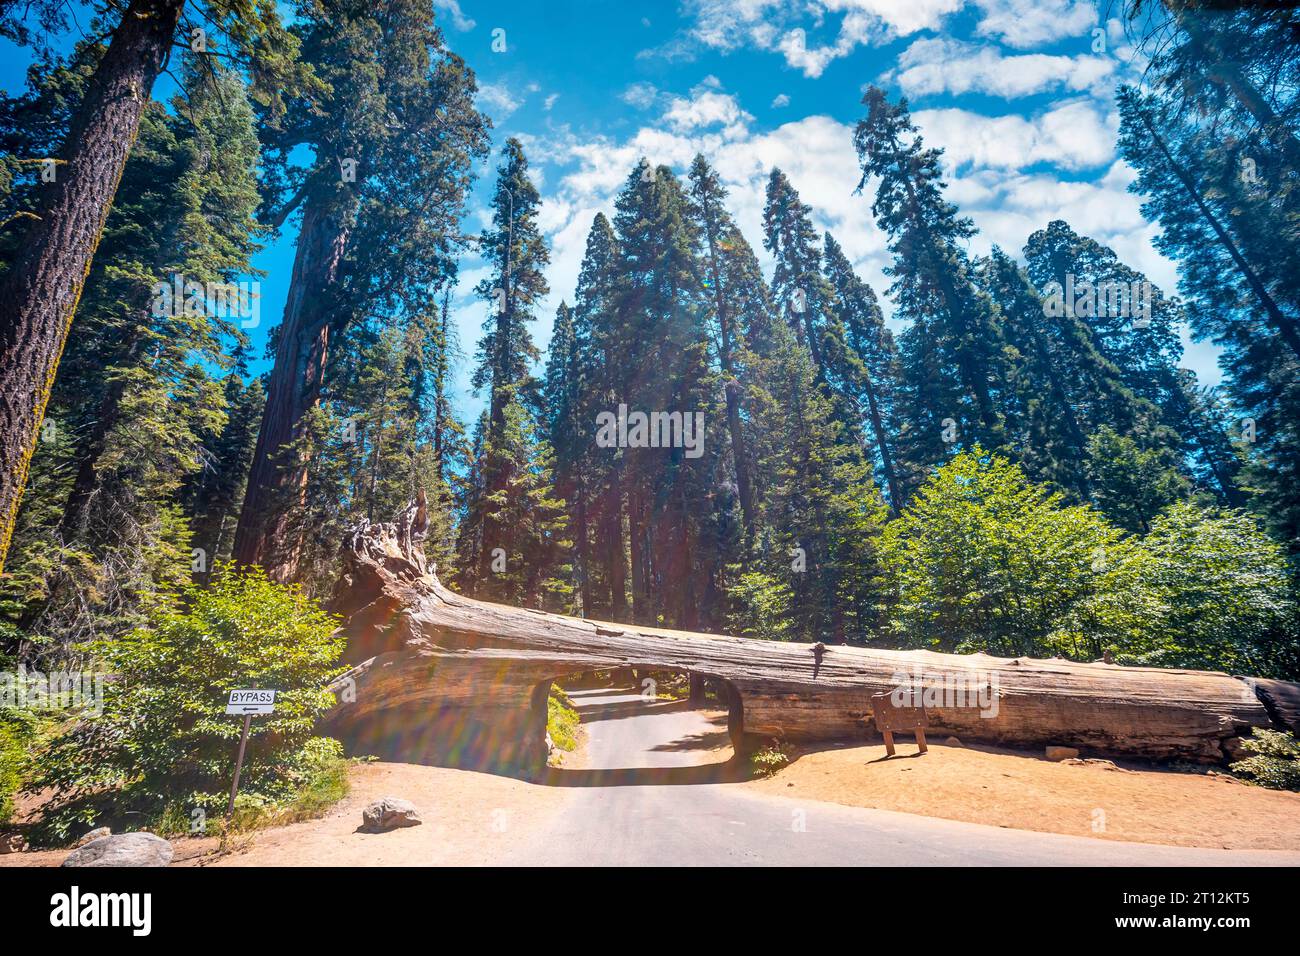 The beautiful tunnel tree called Tunnel Log in Sequoia National Park where multiple cars pass every day, California. United States Stock Photo